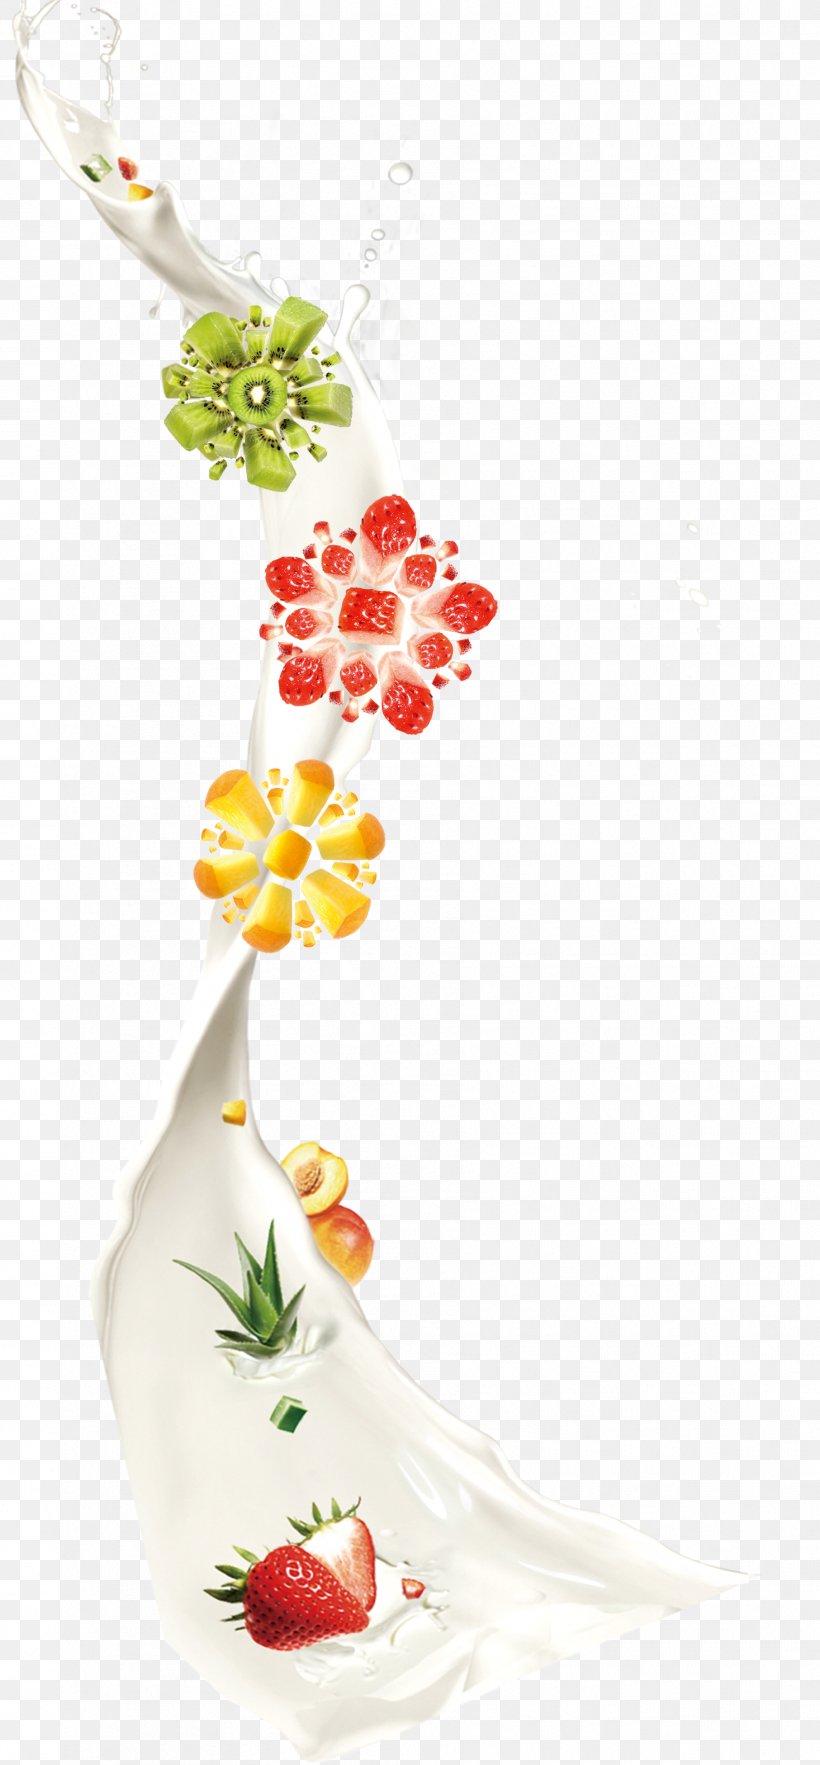 Strawberry Cows Milk Fruit, PNG, 1813x3904px, Strawberry, Cows Milk, Flora, Floral Design, Floristry Download Free